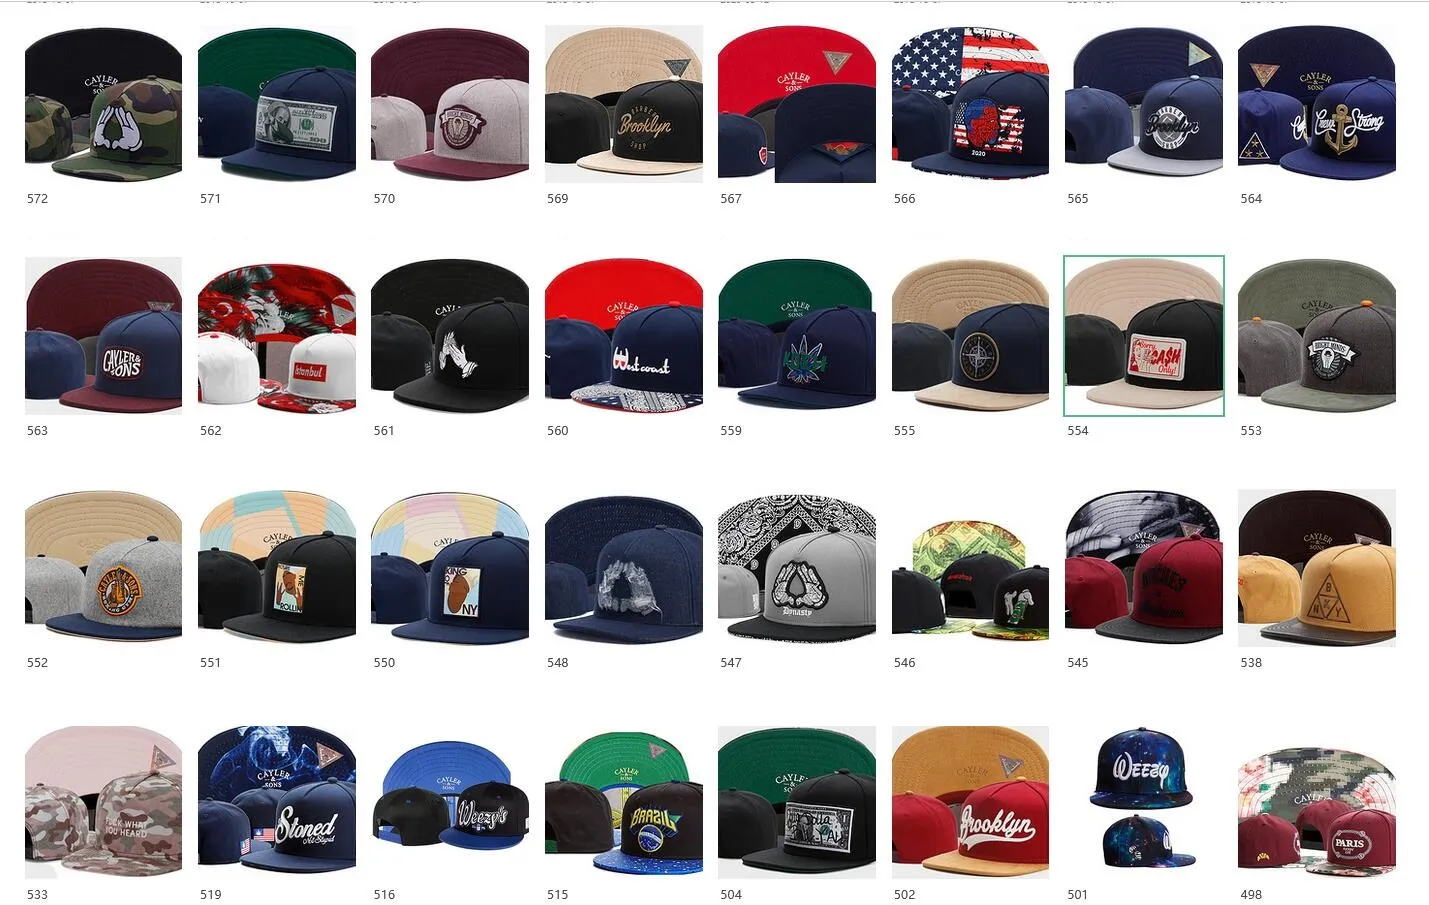 Hip Curved Caps Hop Hat Fashion Hot And Unique New $4.72 Designs Snapback Women From Cap Yakuda Premium And Cayler Street Men Sons Headwear Yakuda,